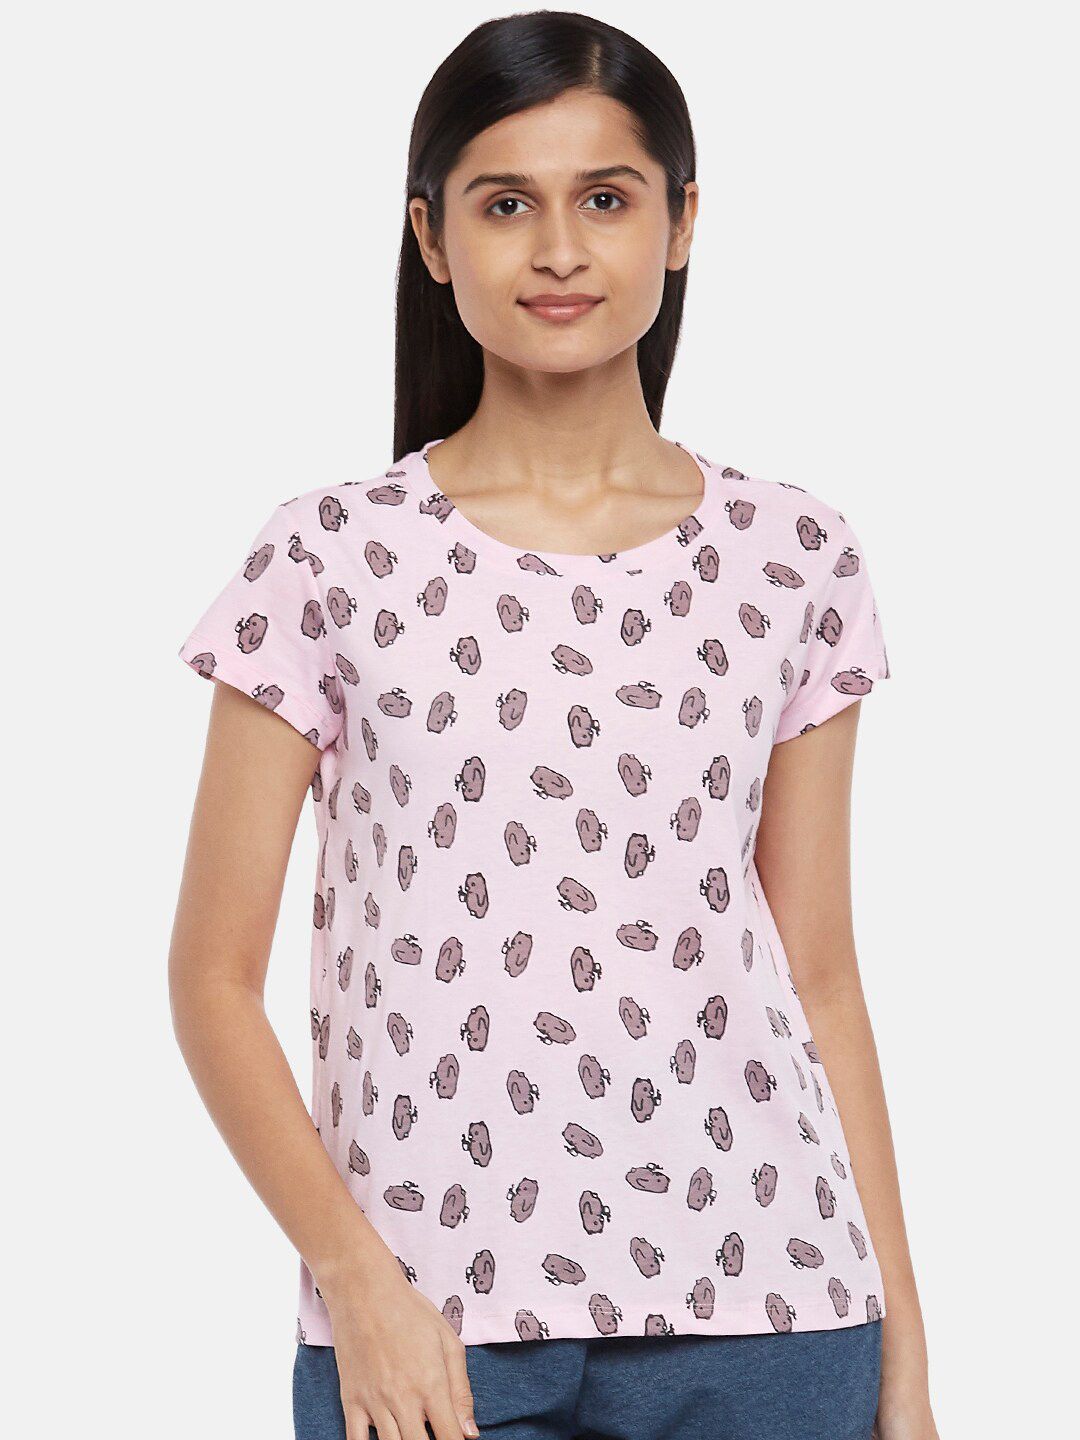 Dreamz by Pantaloons Pink Floral Print Pure Cotton Regular Lounge tshirt Price in India